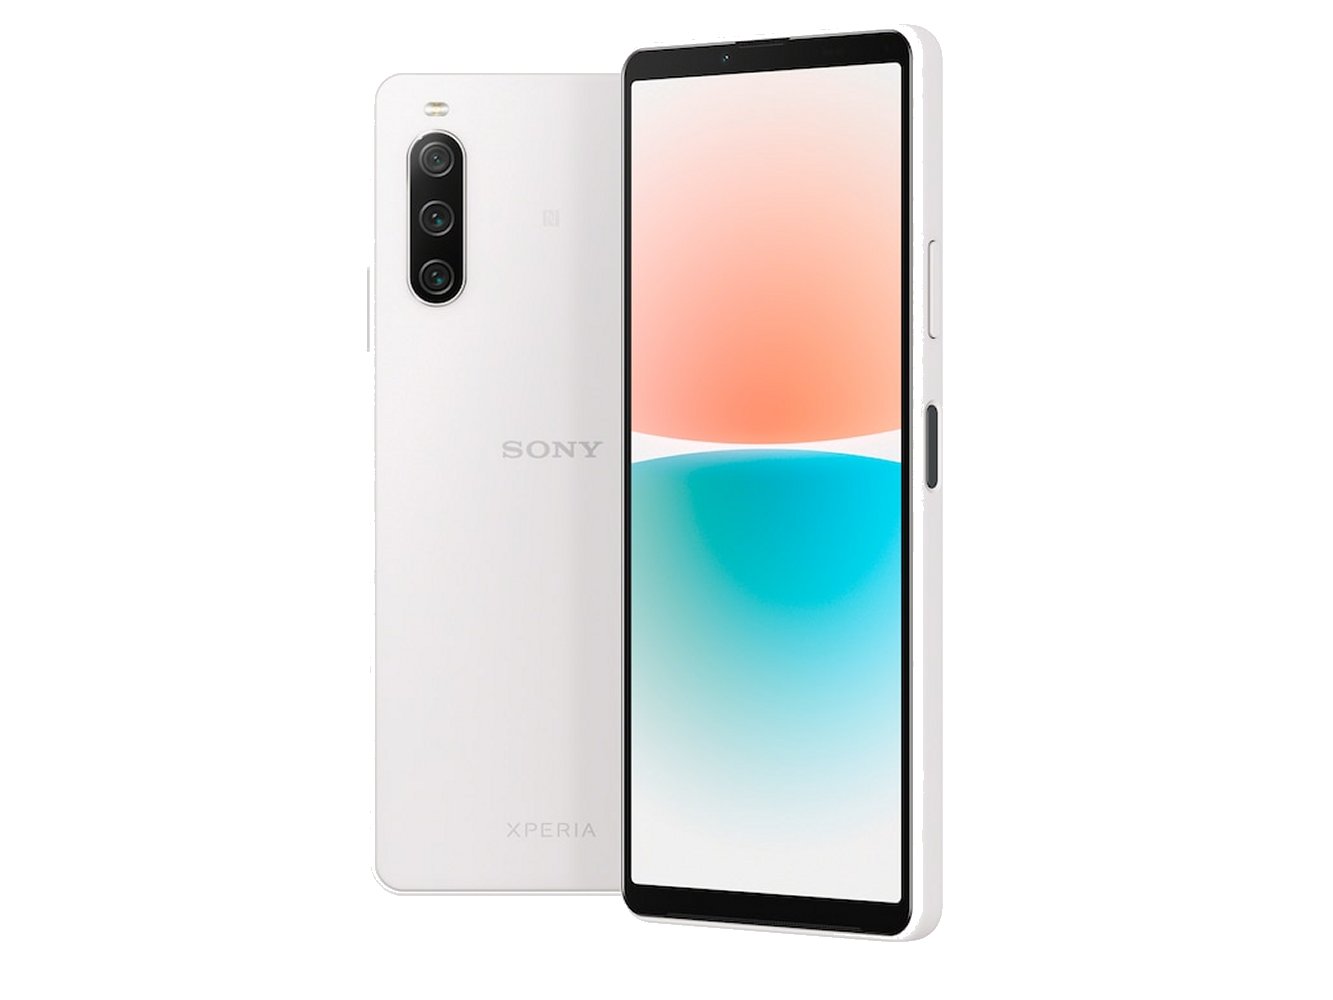 dos Espinoso Chirrido Sony Xperia 10 IV: Tiny smartphone in a practical 21:9 format -  NotebookCheck.net News